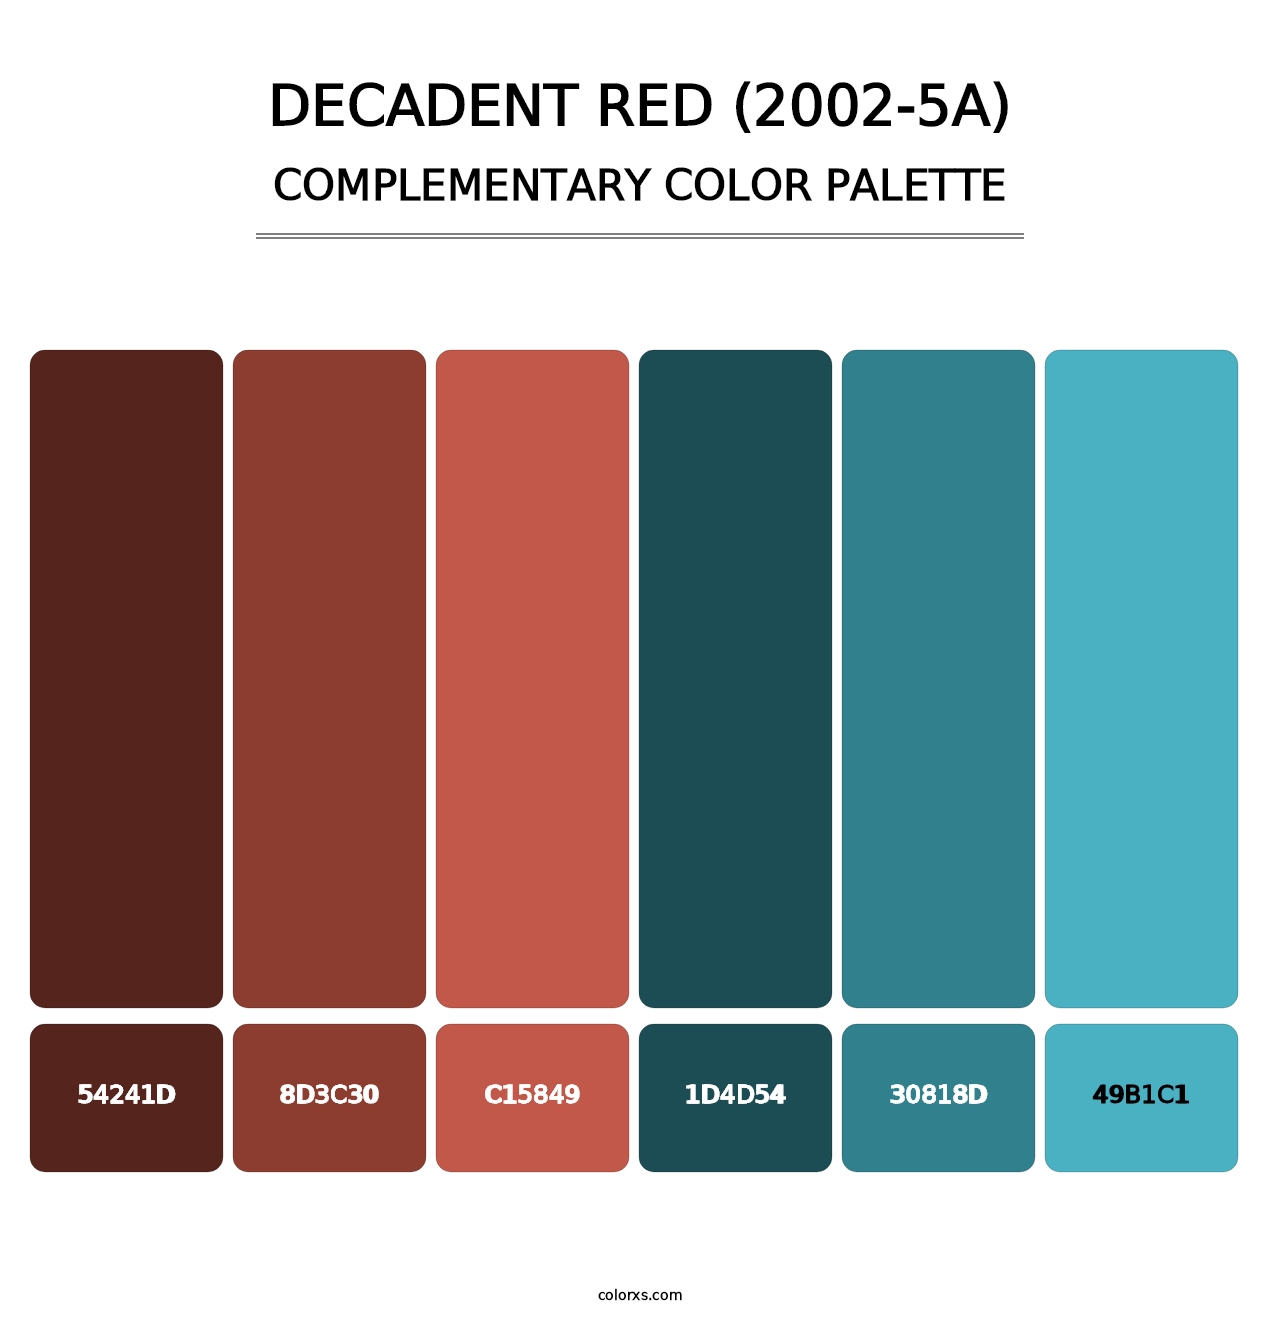 Decadent Red (2002-5A) - Complementary Color Palette